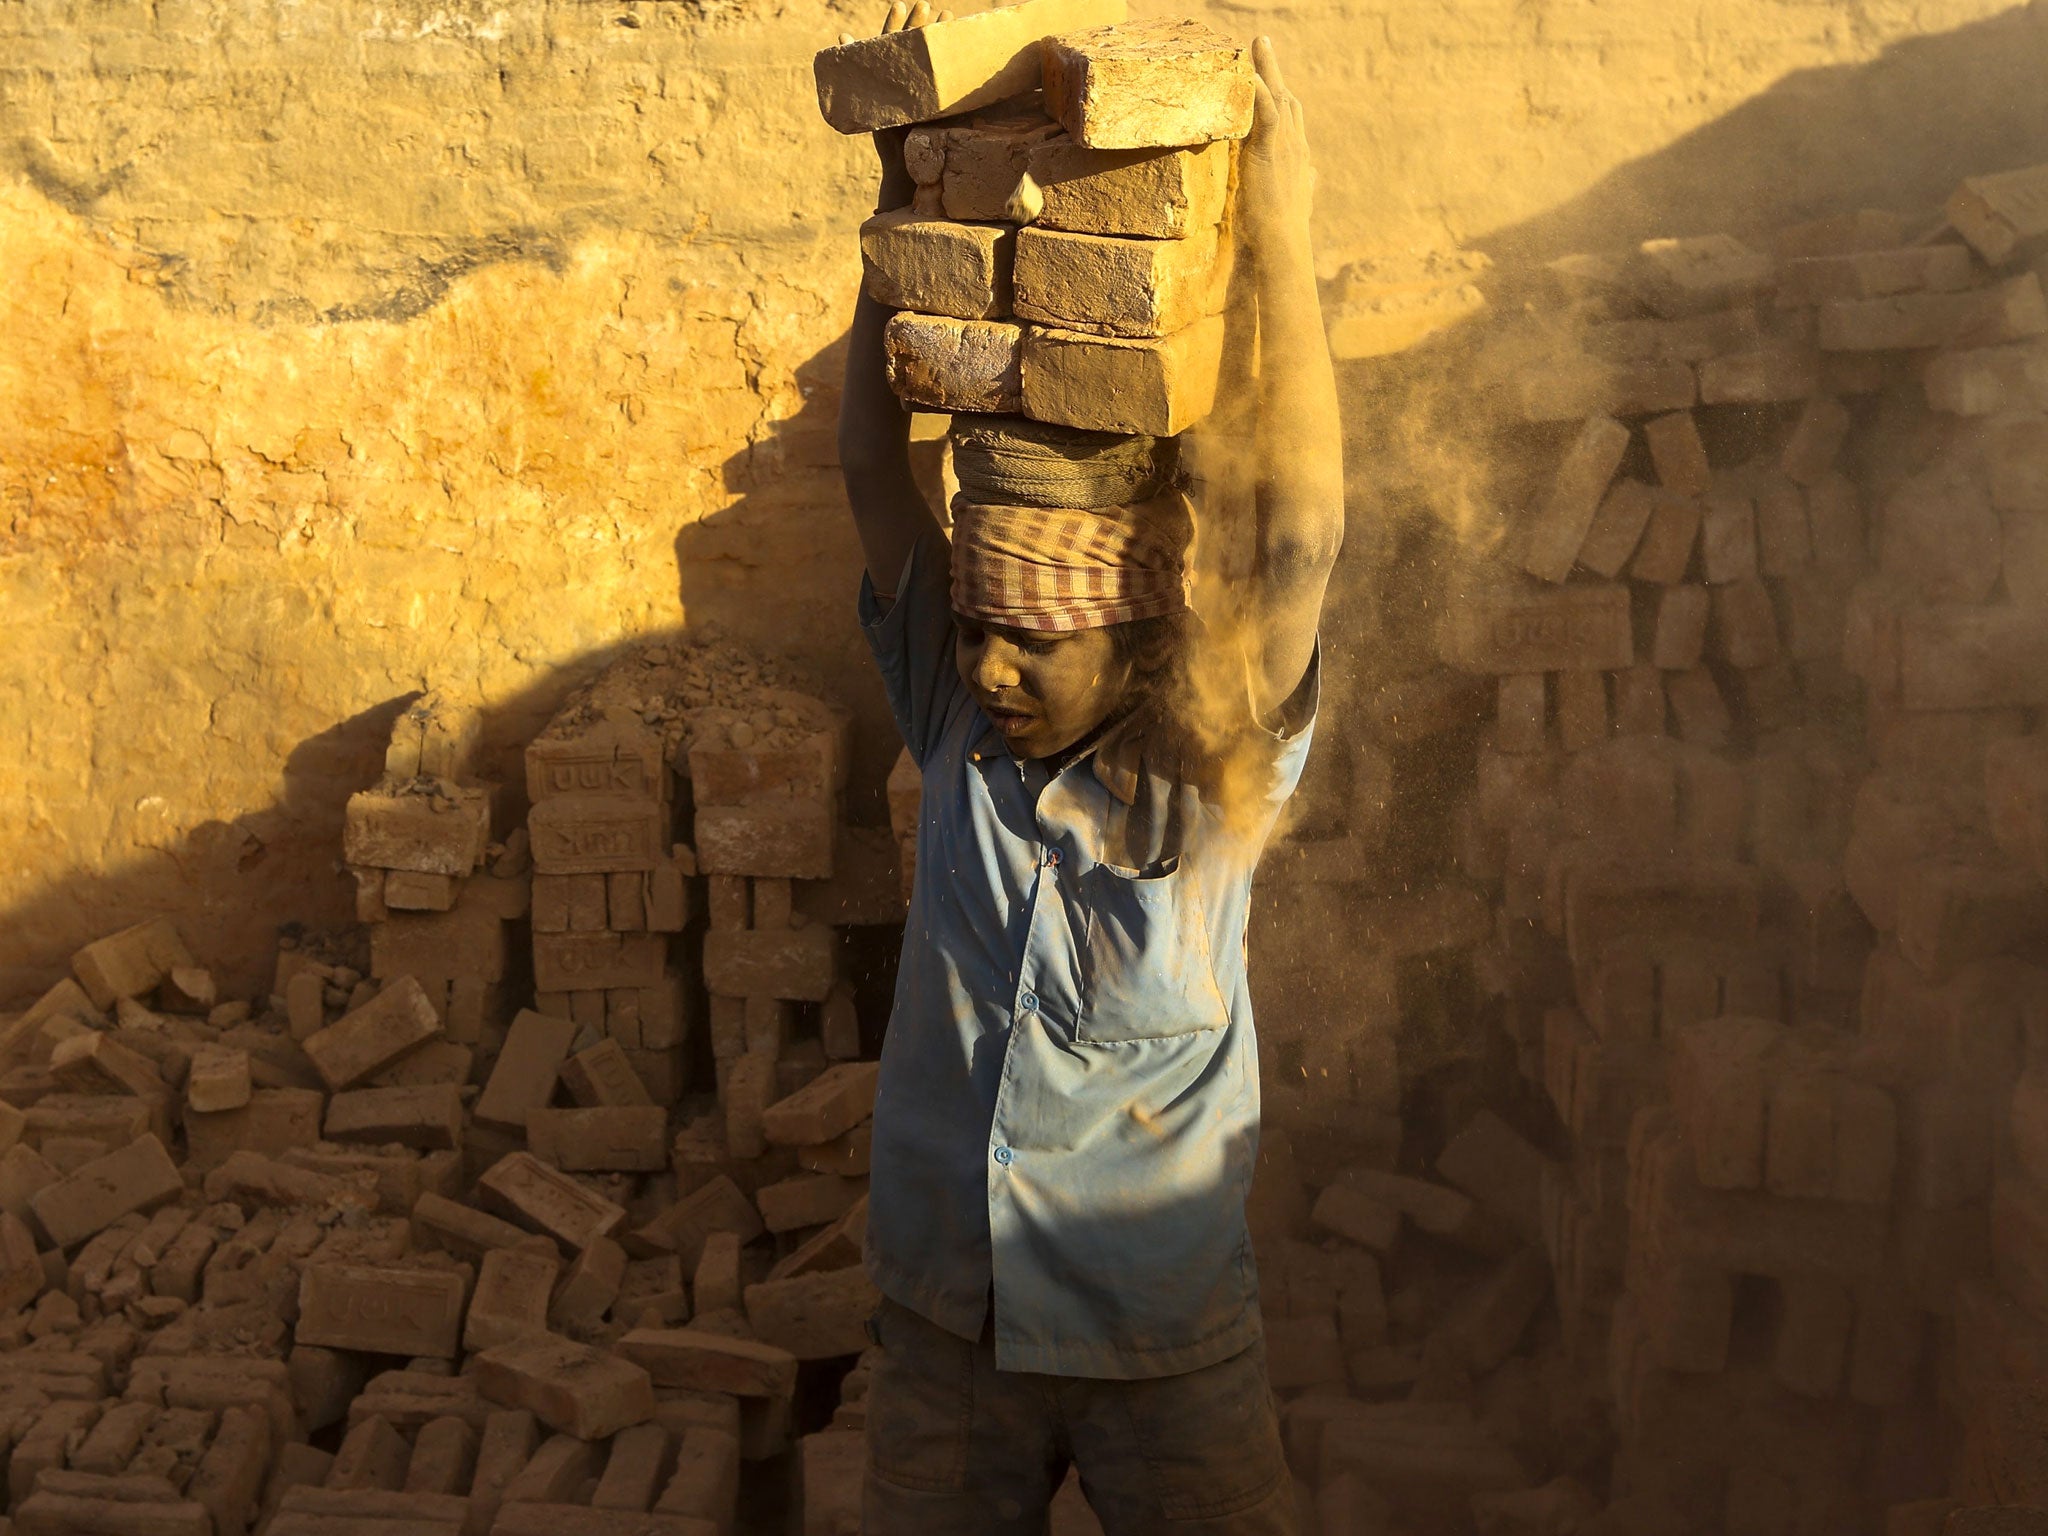 A young boy lifts heavy bricks as he works at brick factory around Kathmandu valley